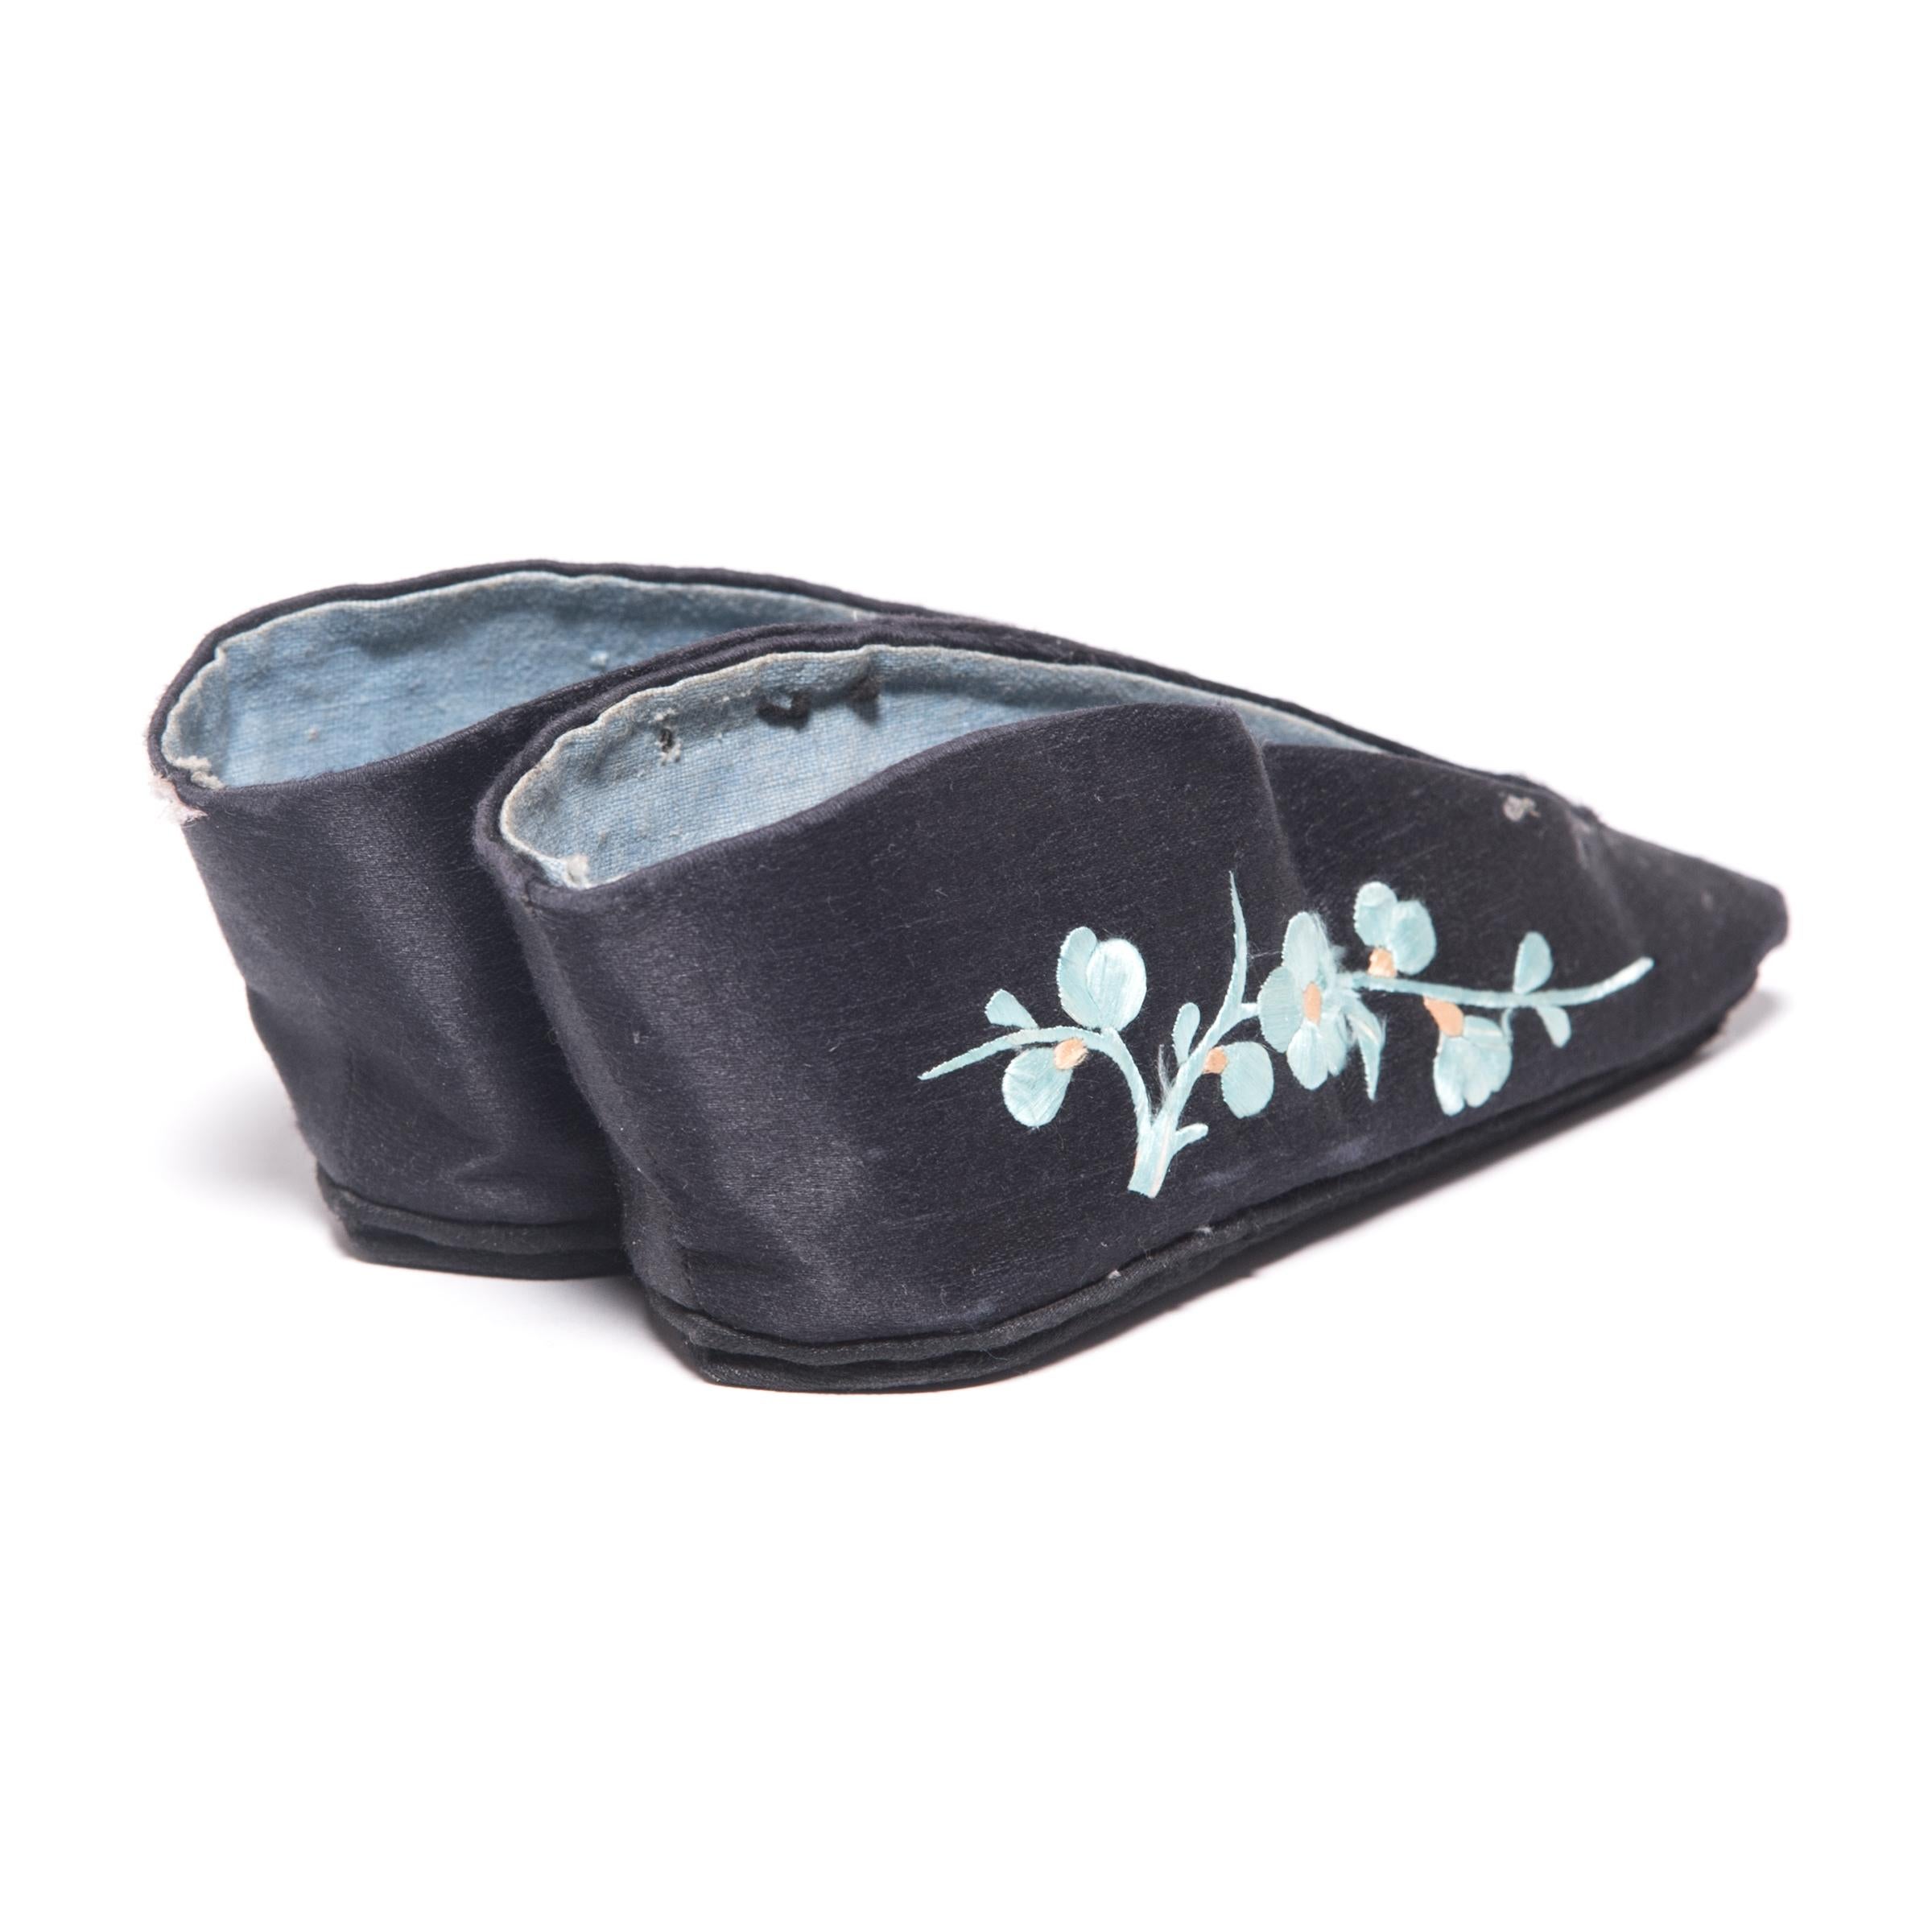 Qing Chinese Black Silk Lotus Slippers with Plum Blossoms, c. 1850 For Sale